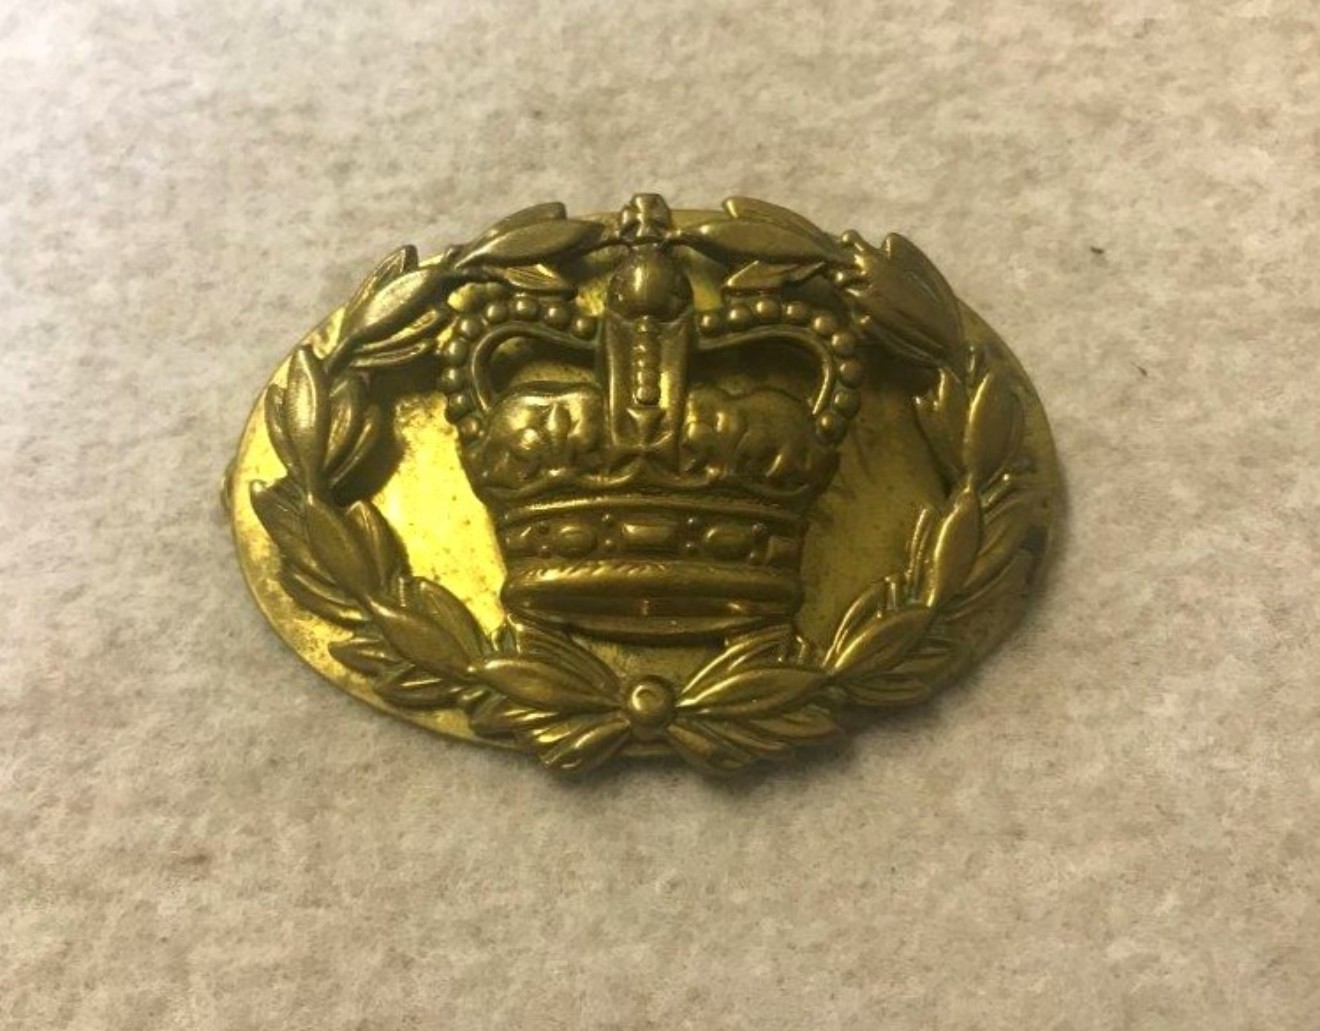 Vintage Kings Crown Warrant Officer's Military Cap Badge c/w Brass Backing Plate, Lugs and Pin